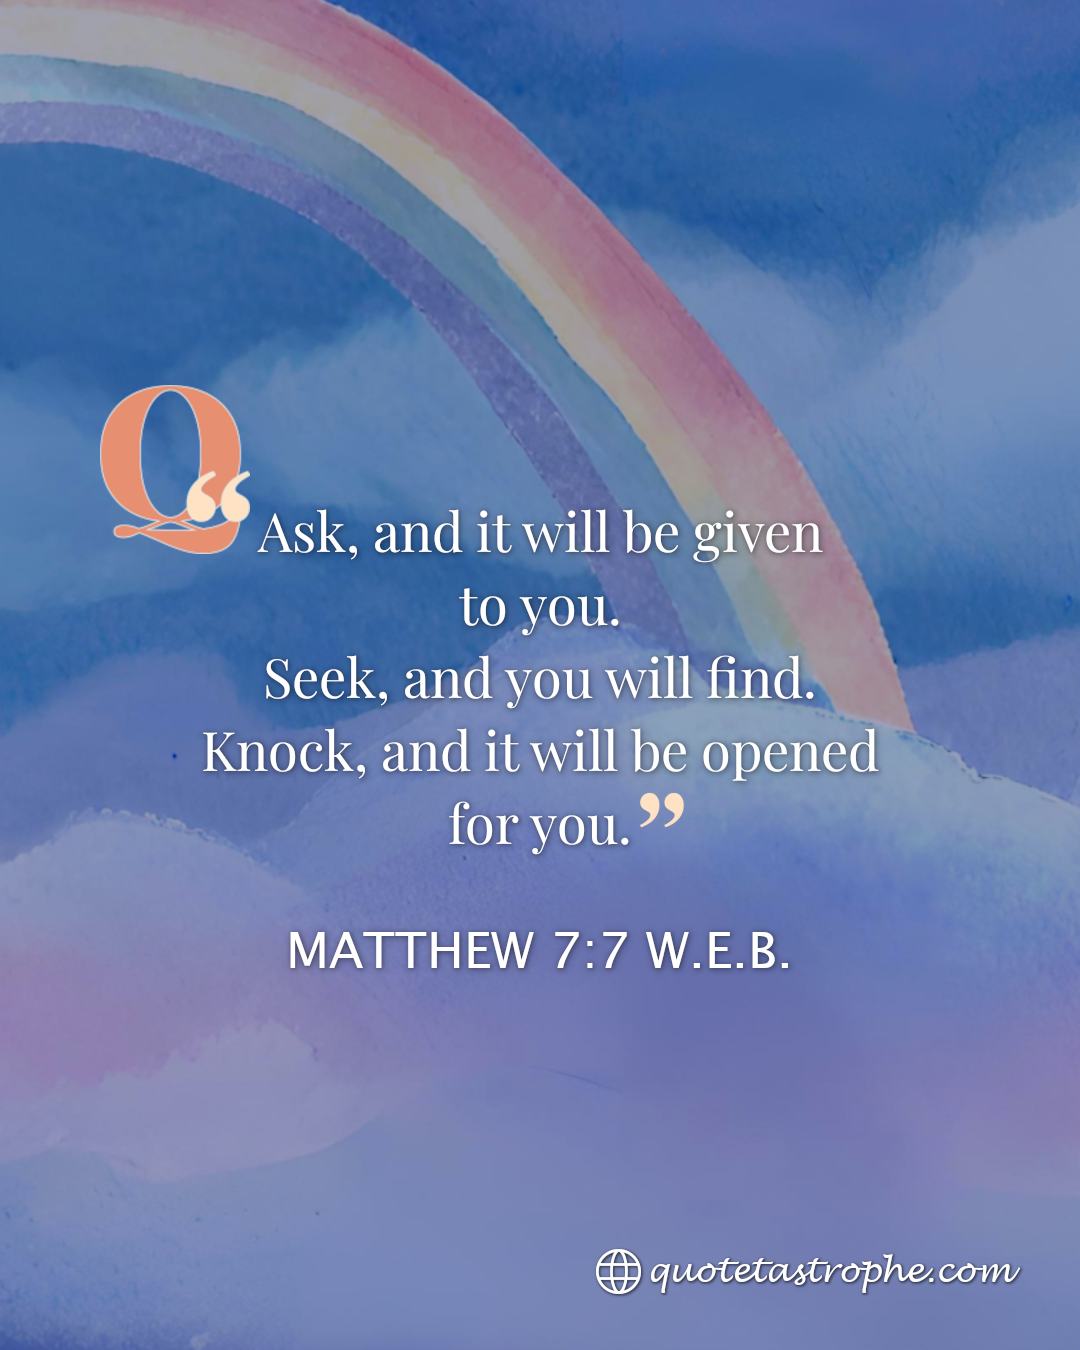 Matthew 7:7 Bible Quotes Images For You